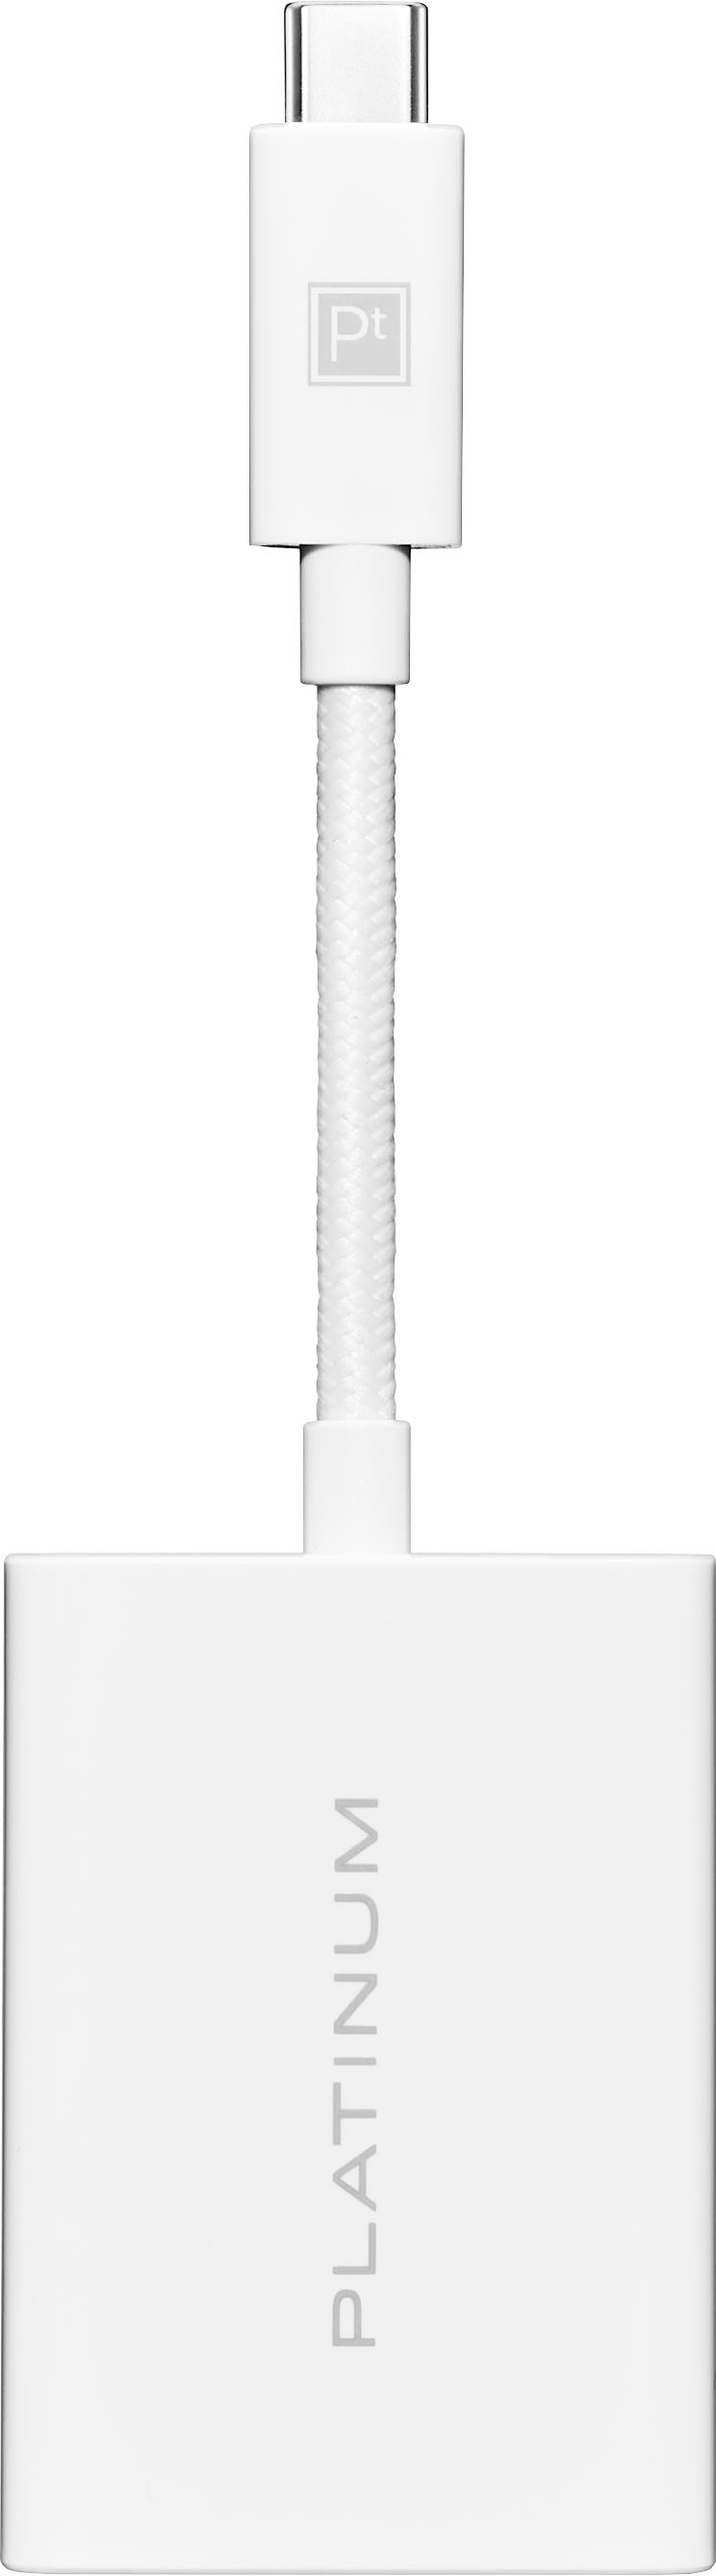 Best Buy: Platinum™ USB-C to SD and microSD Card Reader White PT-AFACS